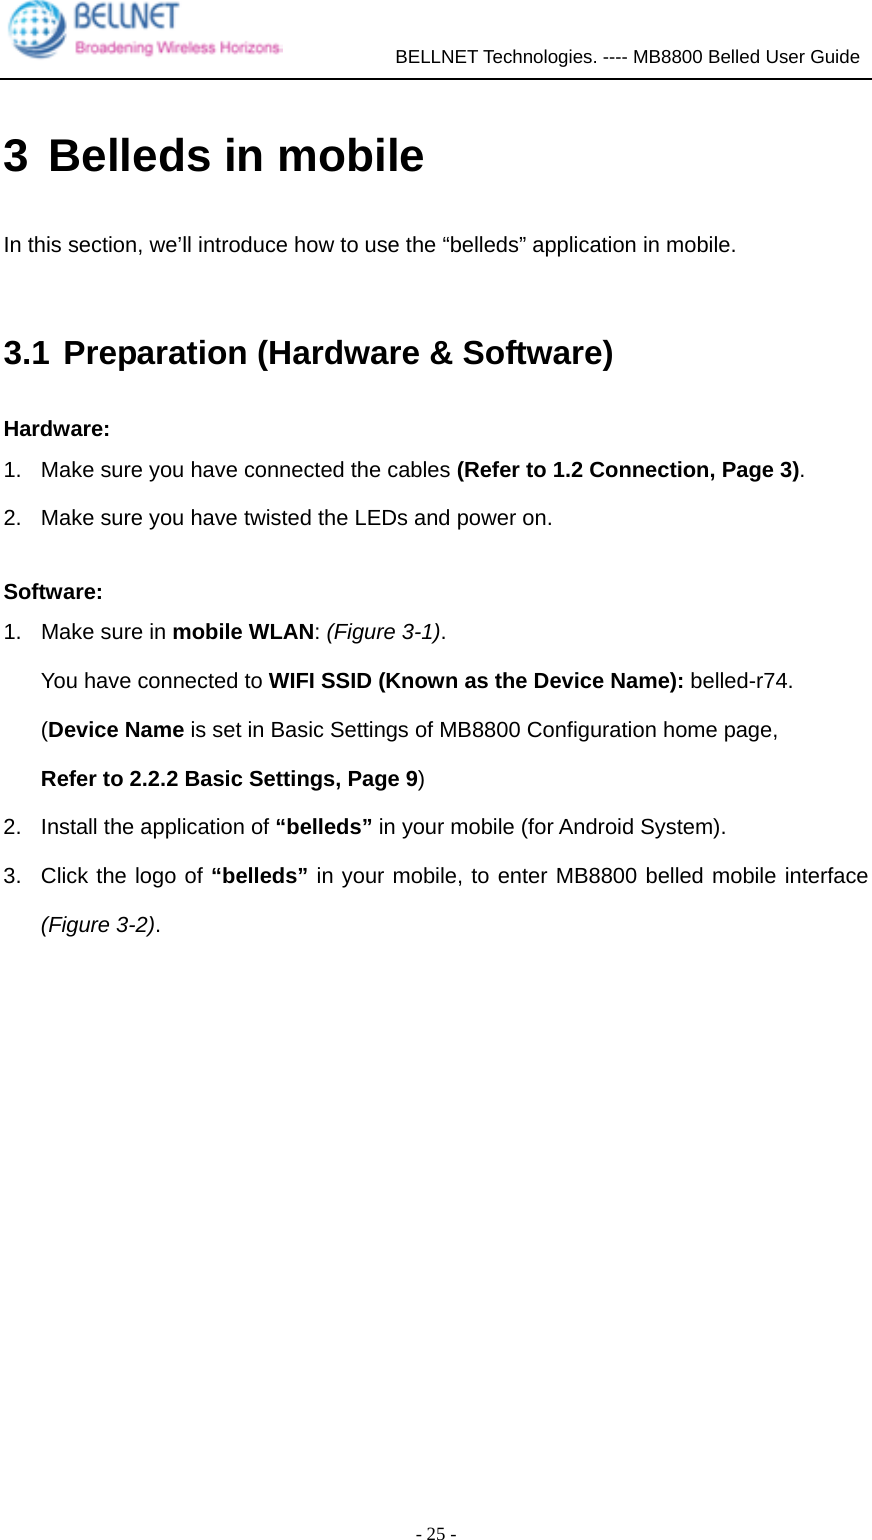             BELLNET Technologies. ---- MB8800 Belled User Guide  - 25 - 3 Belleds in mobile In this section, we’ll introduce how to use the “belleds” application in mobile.  3.1 Preparation (Hardware &amp; Software) Hardware: 1.  Make sure you have connected the cables (Refer to 1.2 Connection, Page 3). 2.  Make sure you have twisted the LEDs and power on.  Software: 1.  Make sure in mobile WLAN: (Figure 3-1). You have connected to WIFI SSID (Known as the Device Name): belled-r74. (Device Name is set in Basic Settings of MB8800 Configuration home page, Refer to 2.2.2 Basic Settings, Page 9) 2.  Install the application of “belleds” in your mobile (for Android System).   3.  Click the logo of “belleds” in your mobile, to enter MB8800 belled mobile interface (Figure 3-2).  